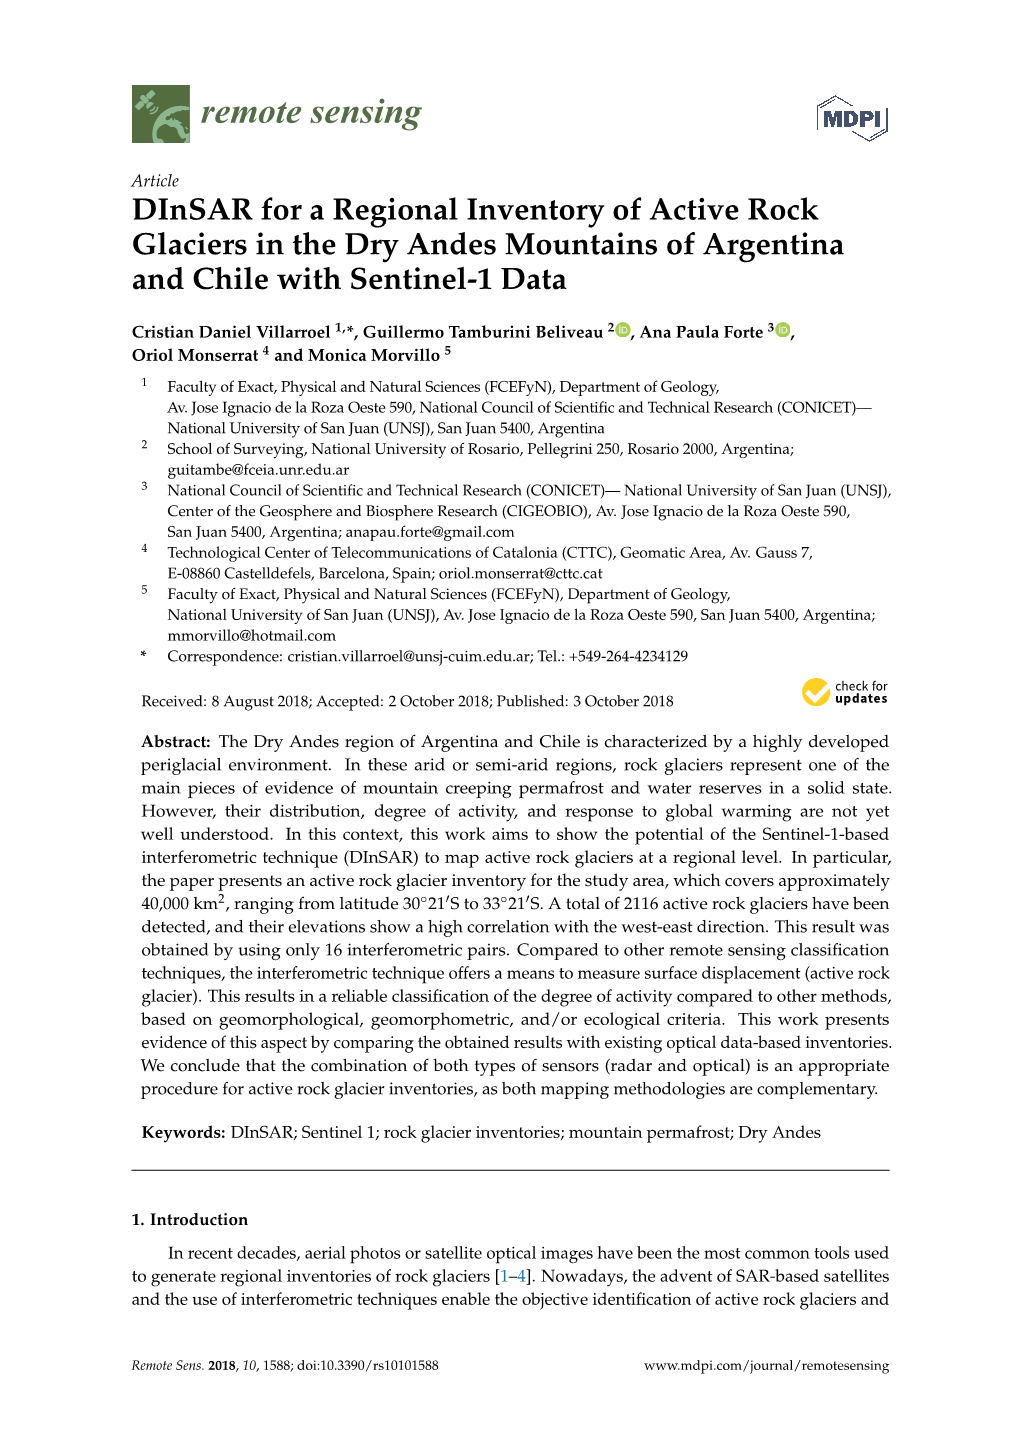 Dinsar for a Regional Inventory of Active Rock Glaciers in the Dry Andes Mountains of Argentina and Chile with Sentinel-1 Data